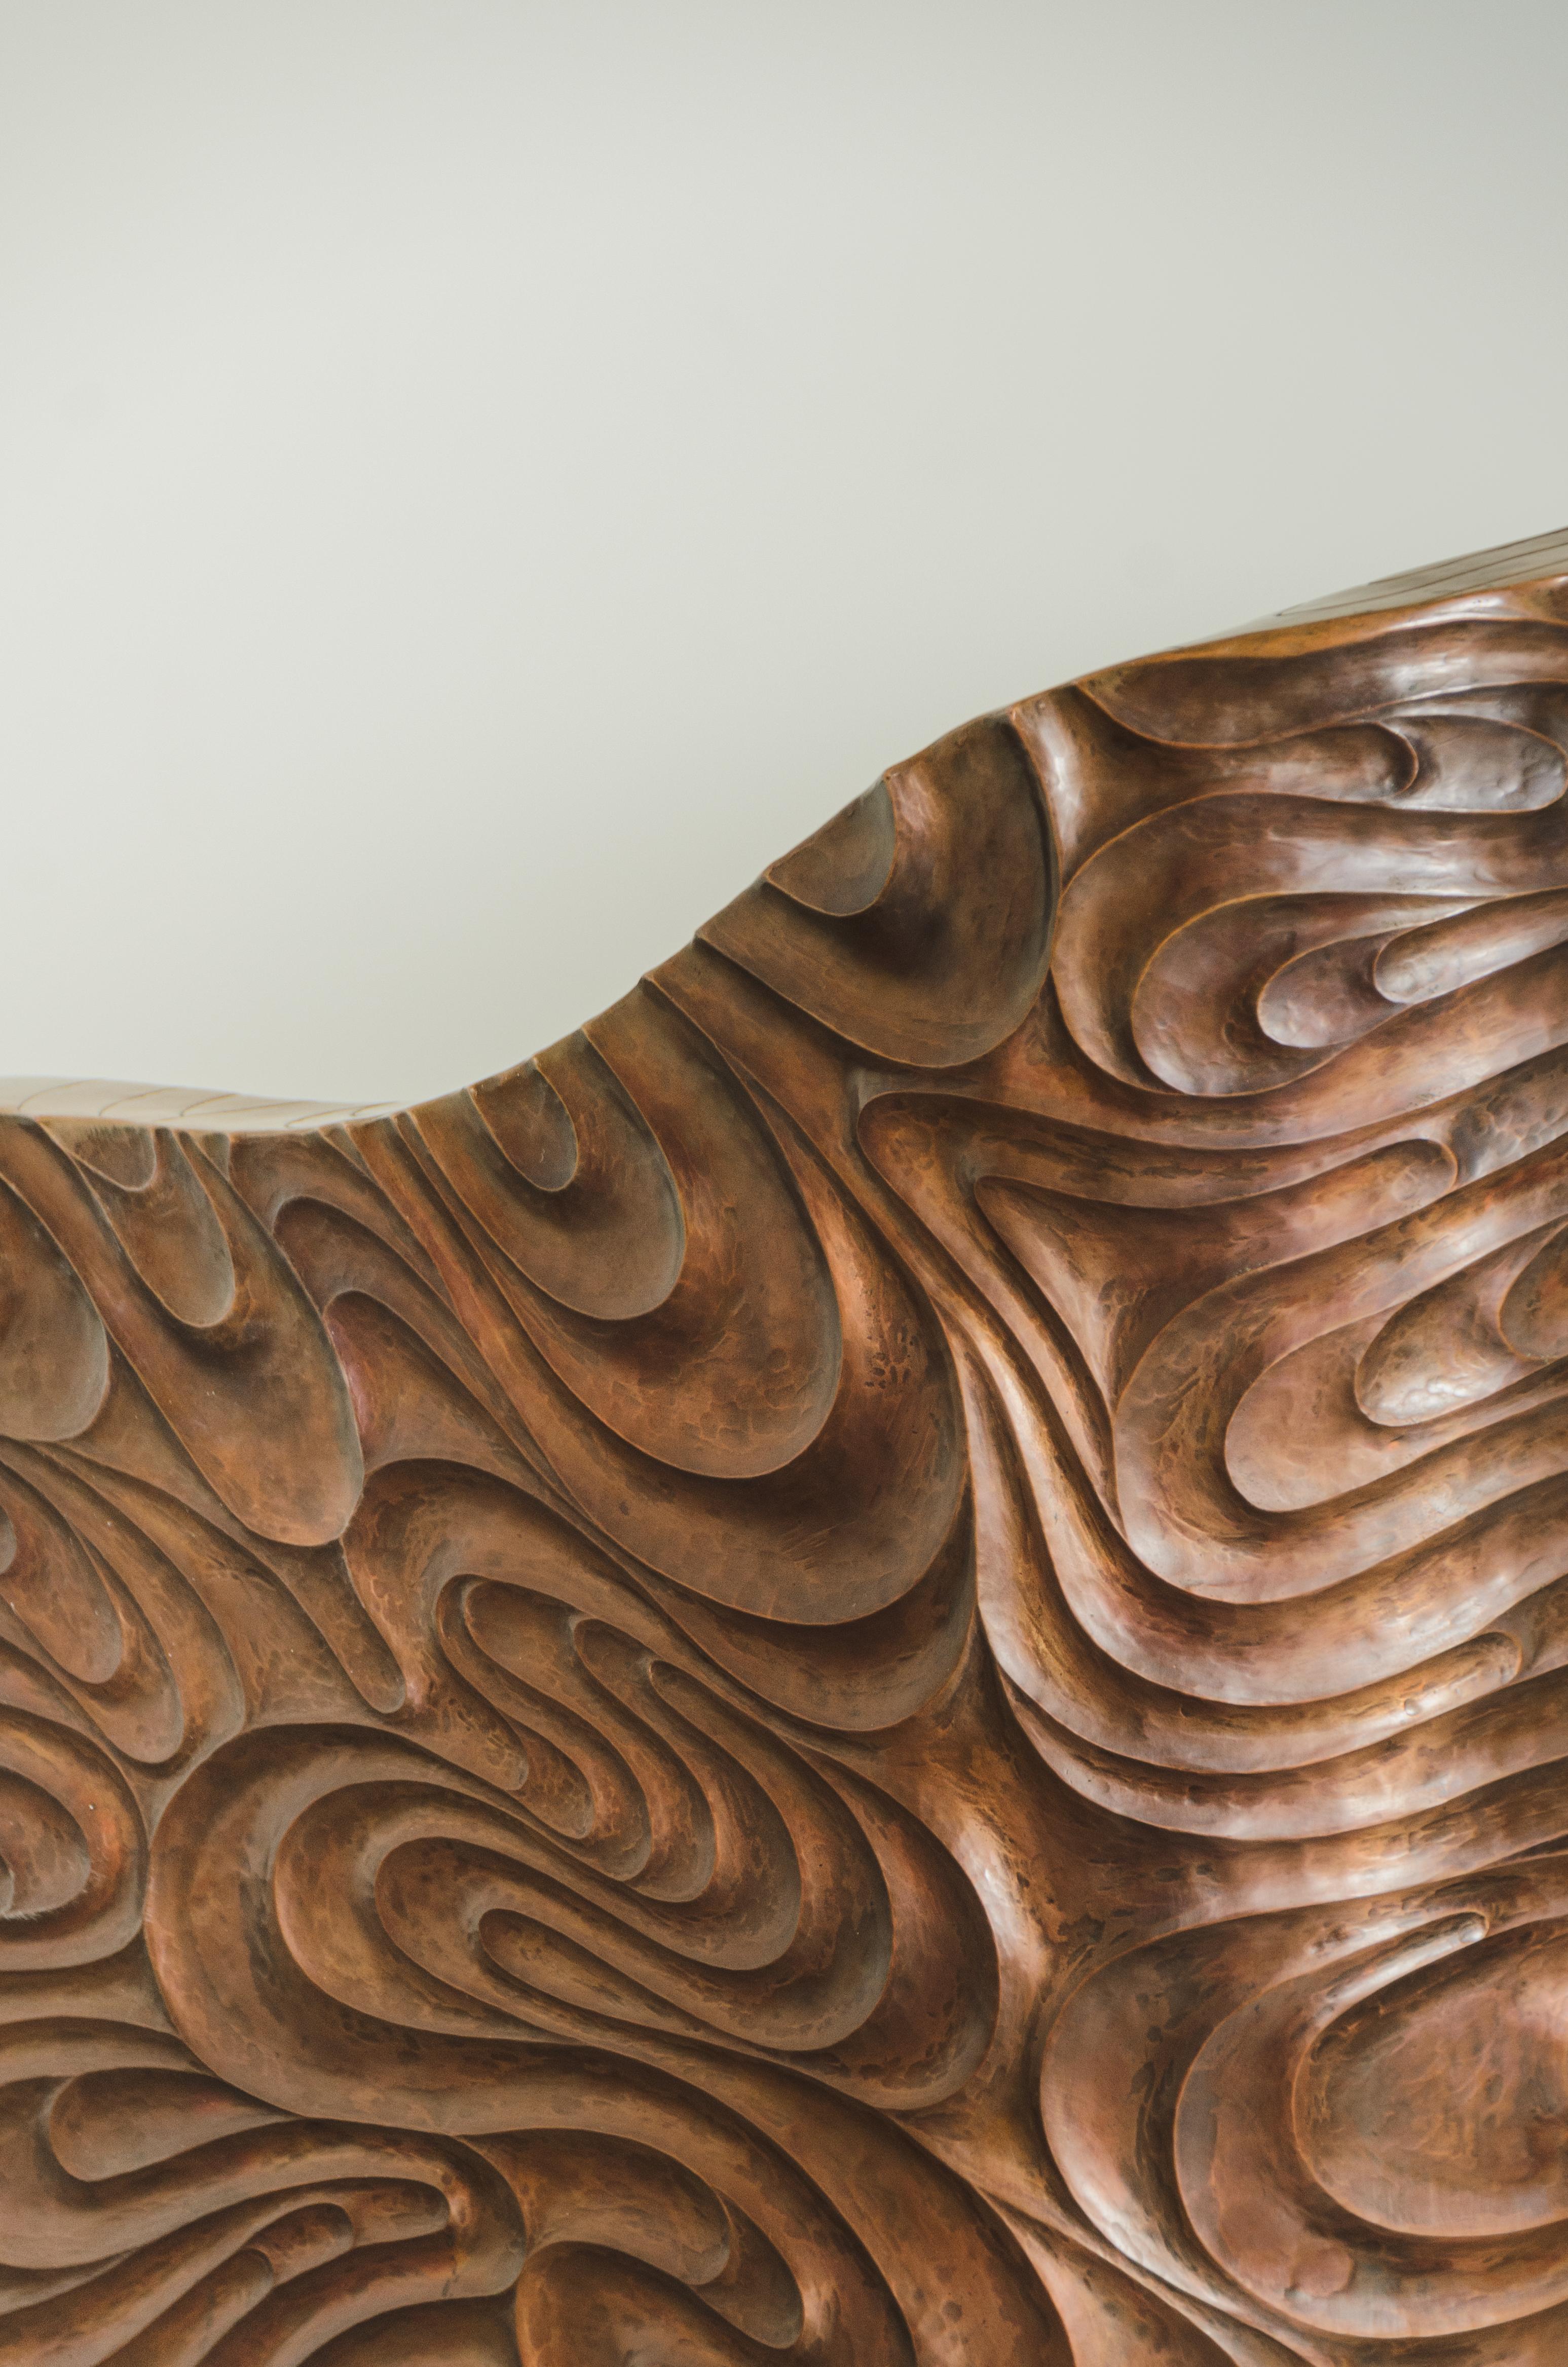 Contemporary Fei Tian Wen Chair in Repoussé Copper by Robert Kuo For Sale 3